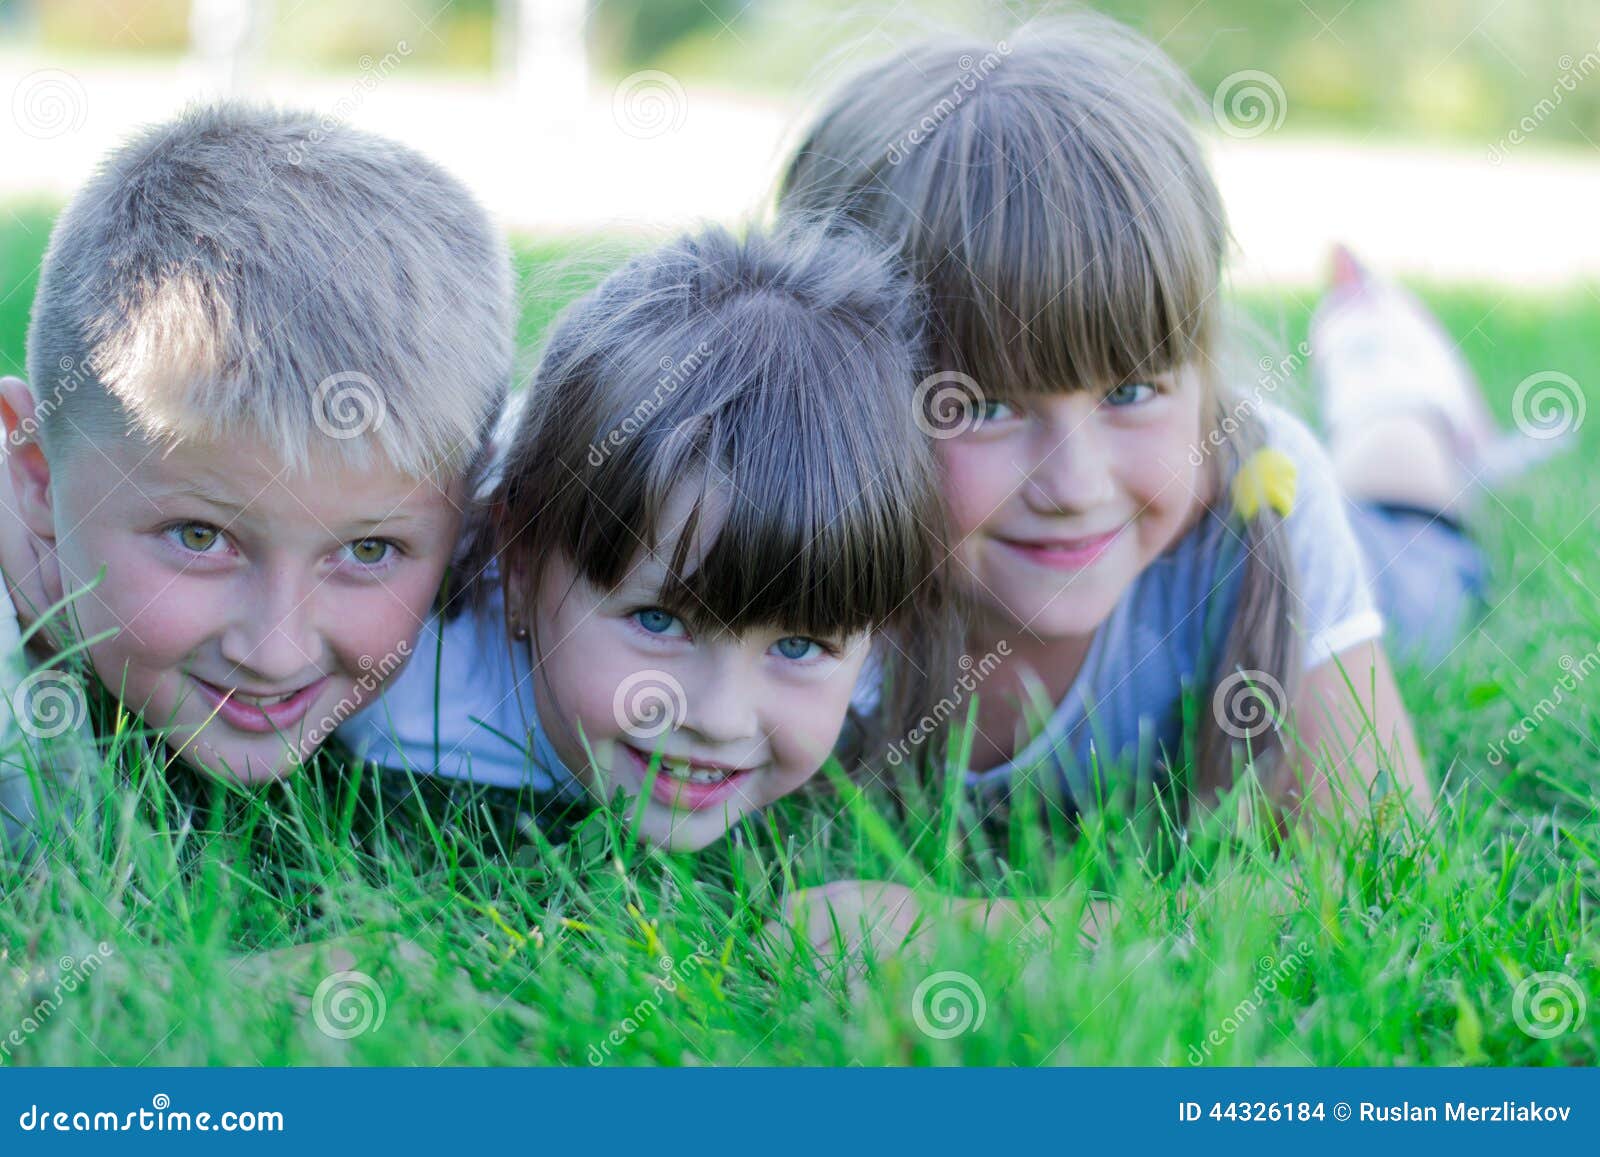 Children Playing on the Grass Stock Photo - Image of friendship, human